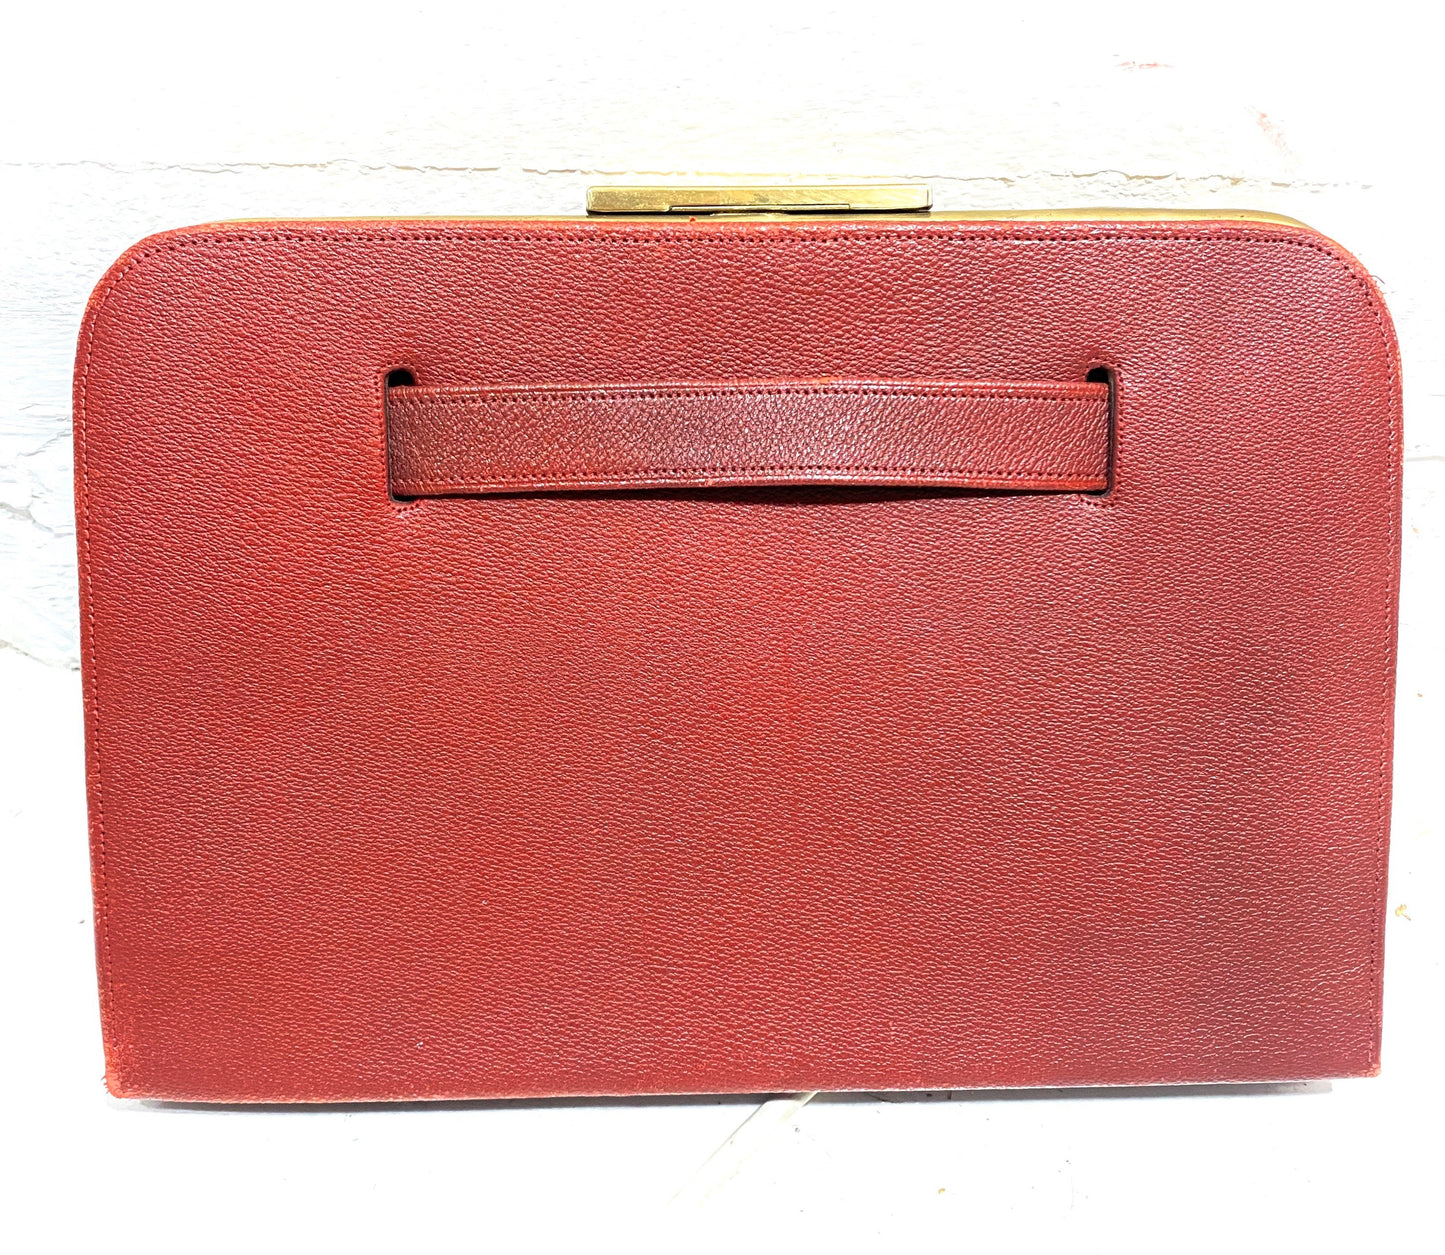 1960s burgundy leather and brass collectible clutch bag in mint condition